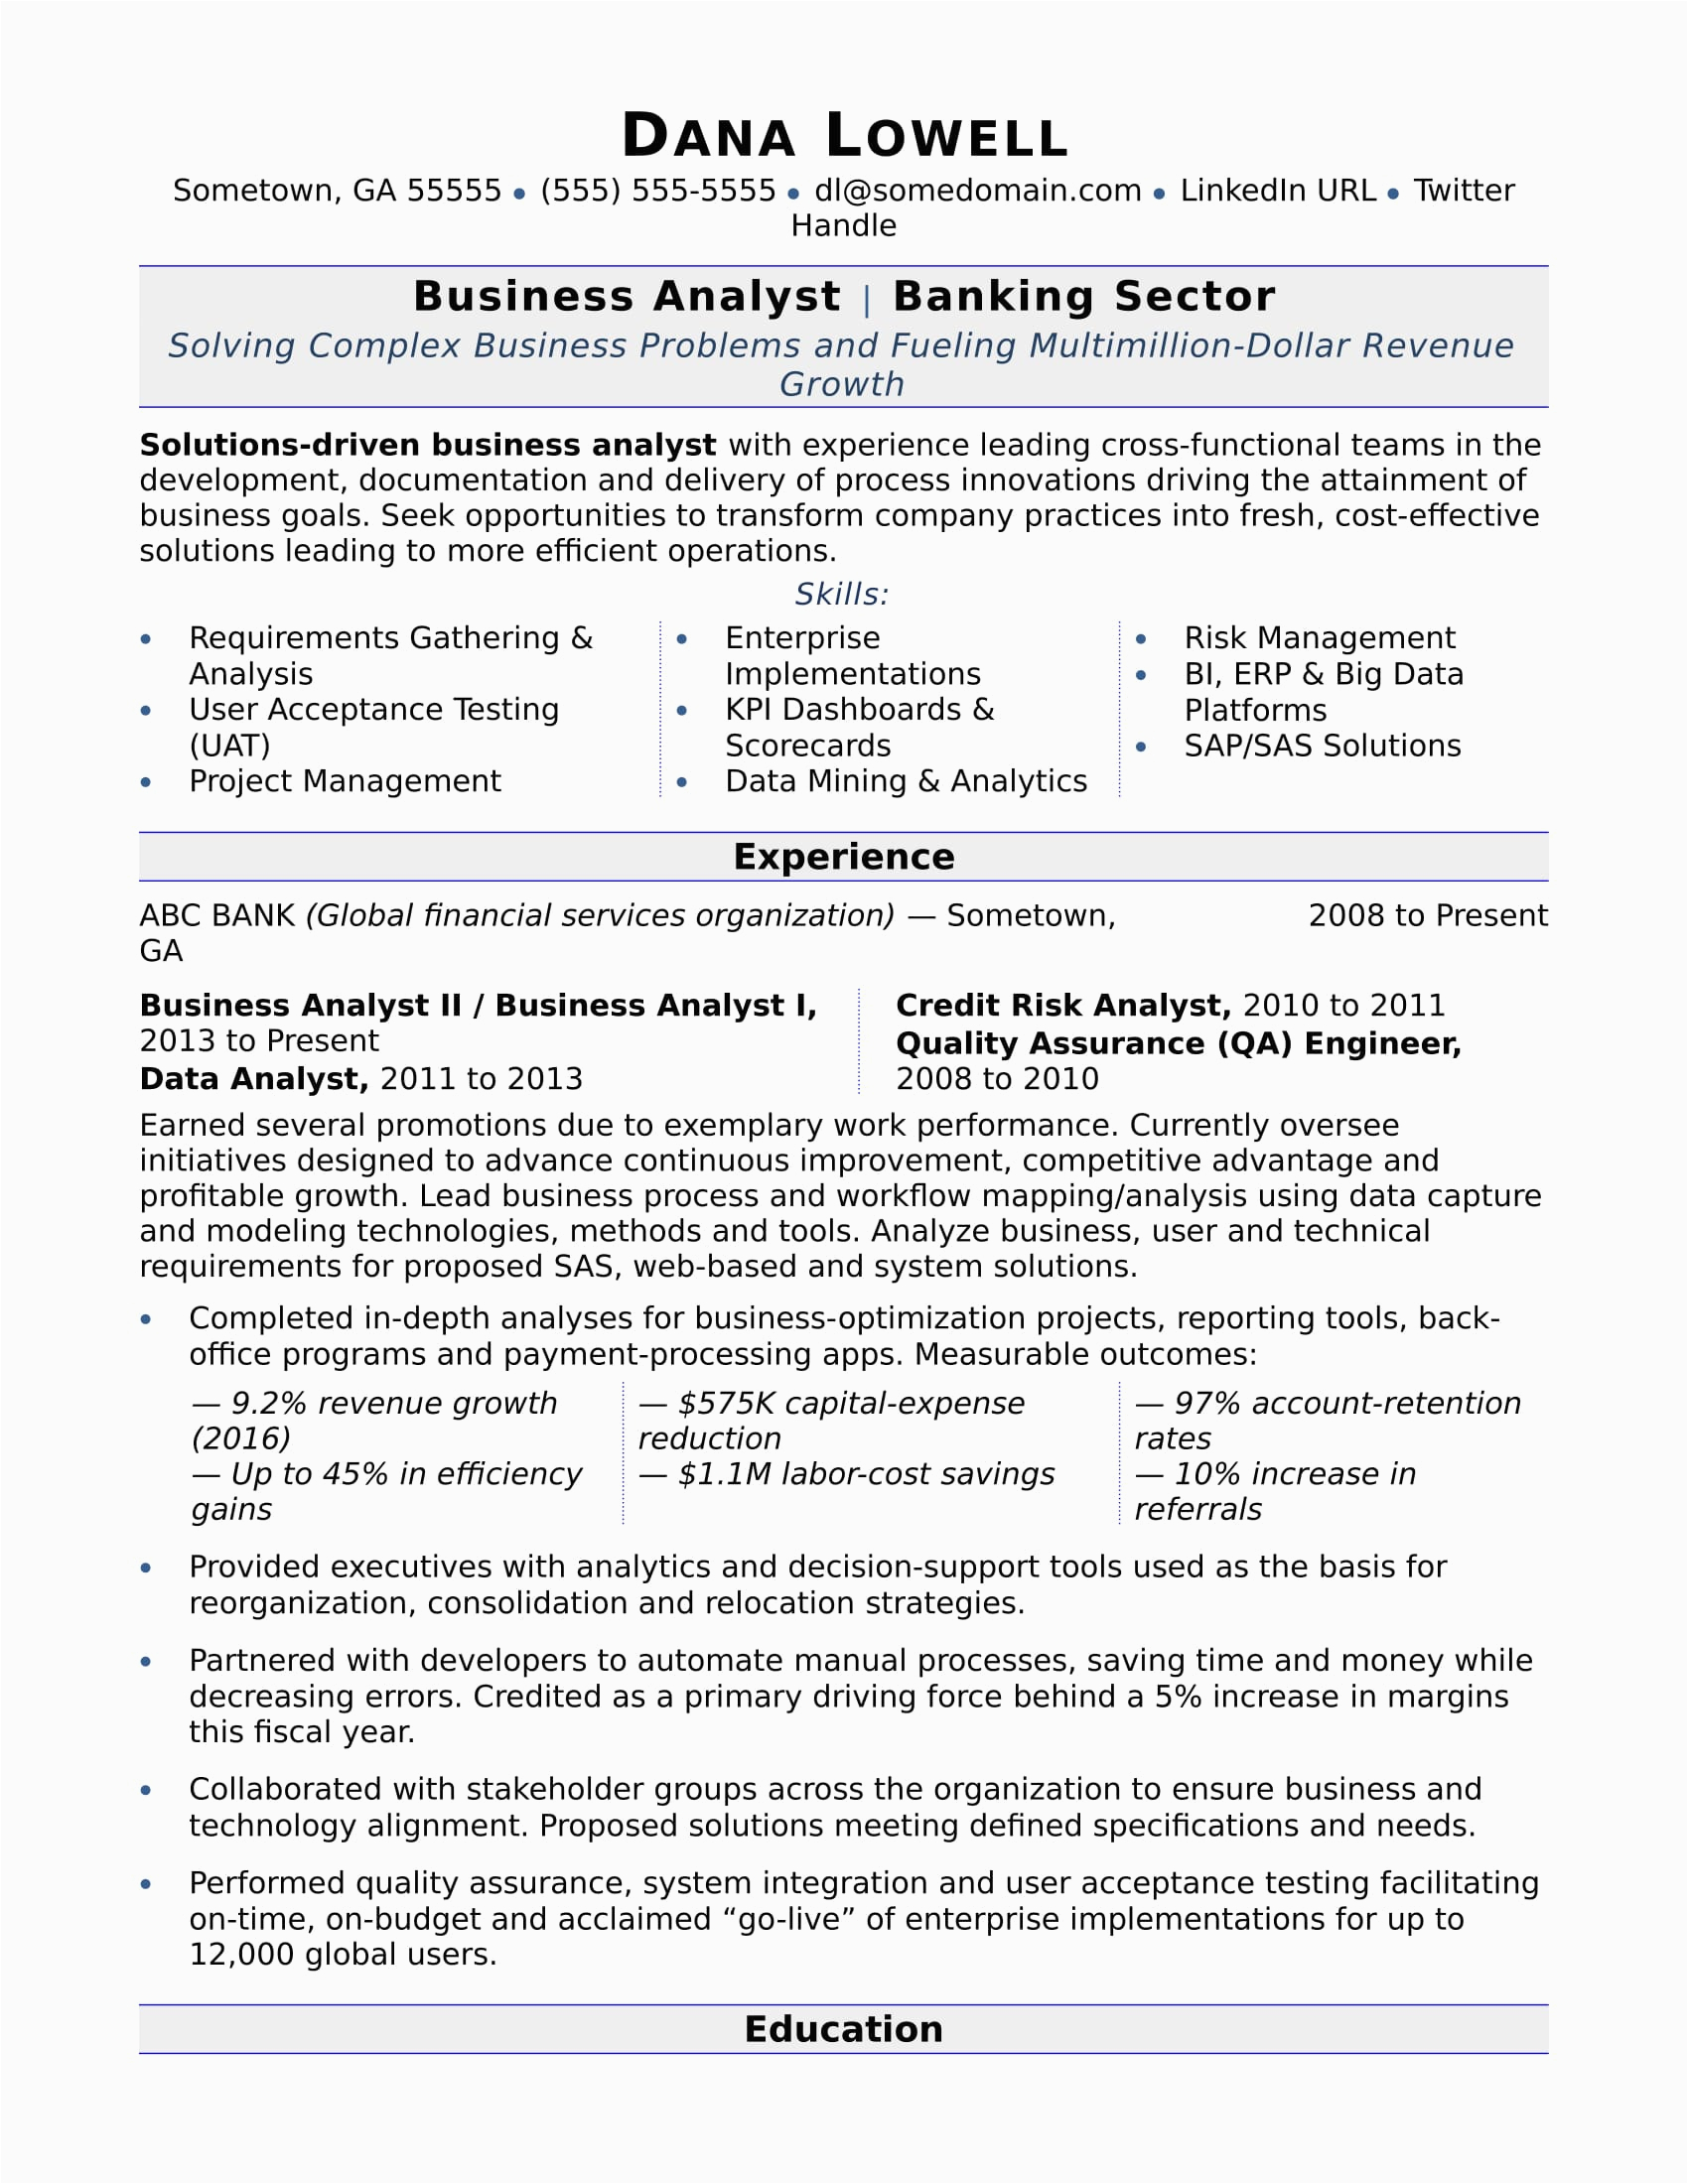 Sample Resume Objective Statements for Business Analyst Resume Samples for Business Analyst Entry Level Business Analyst Resumes